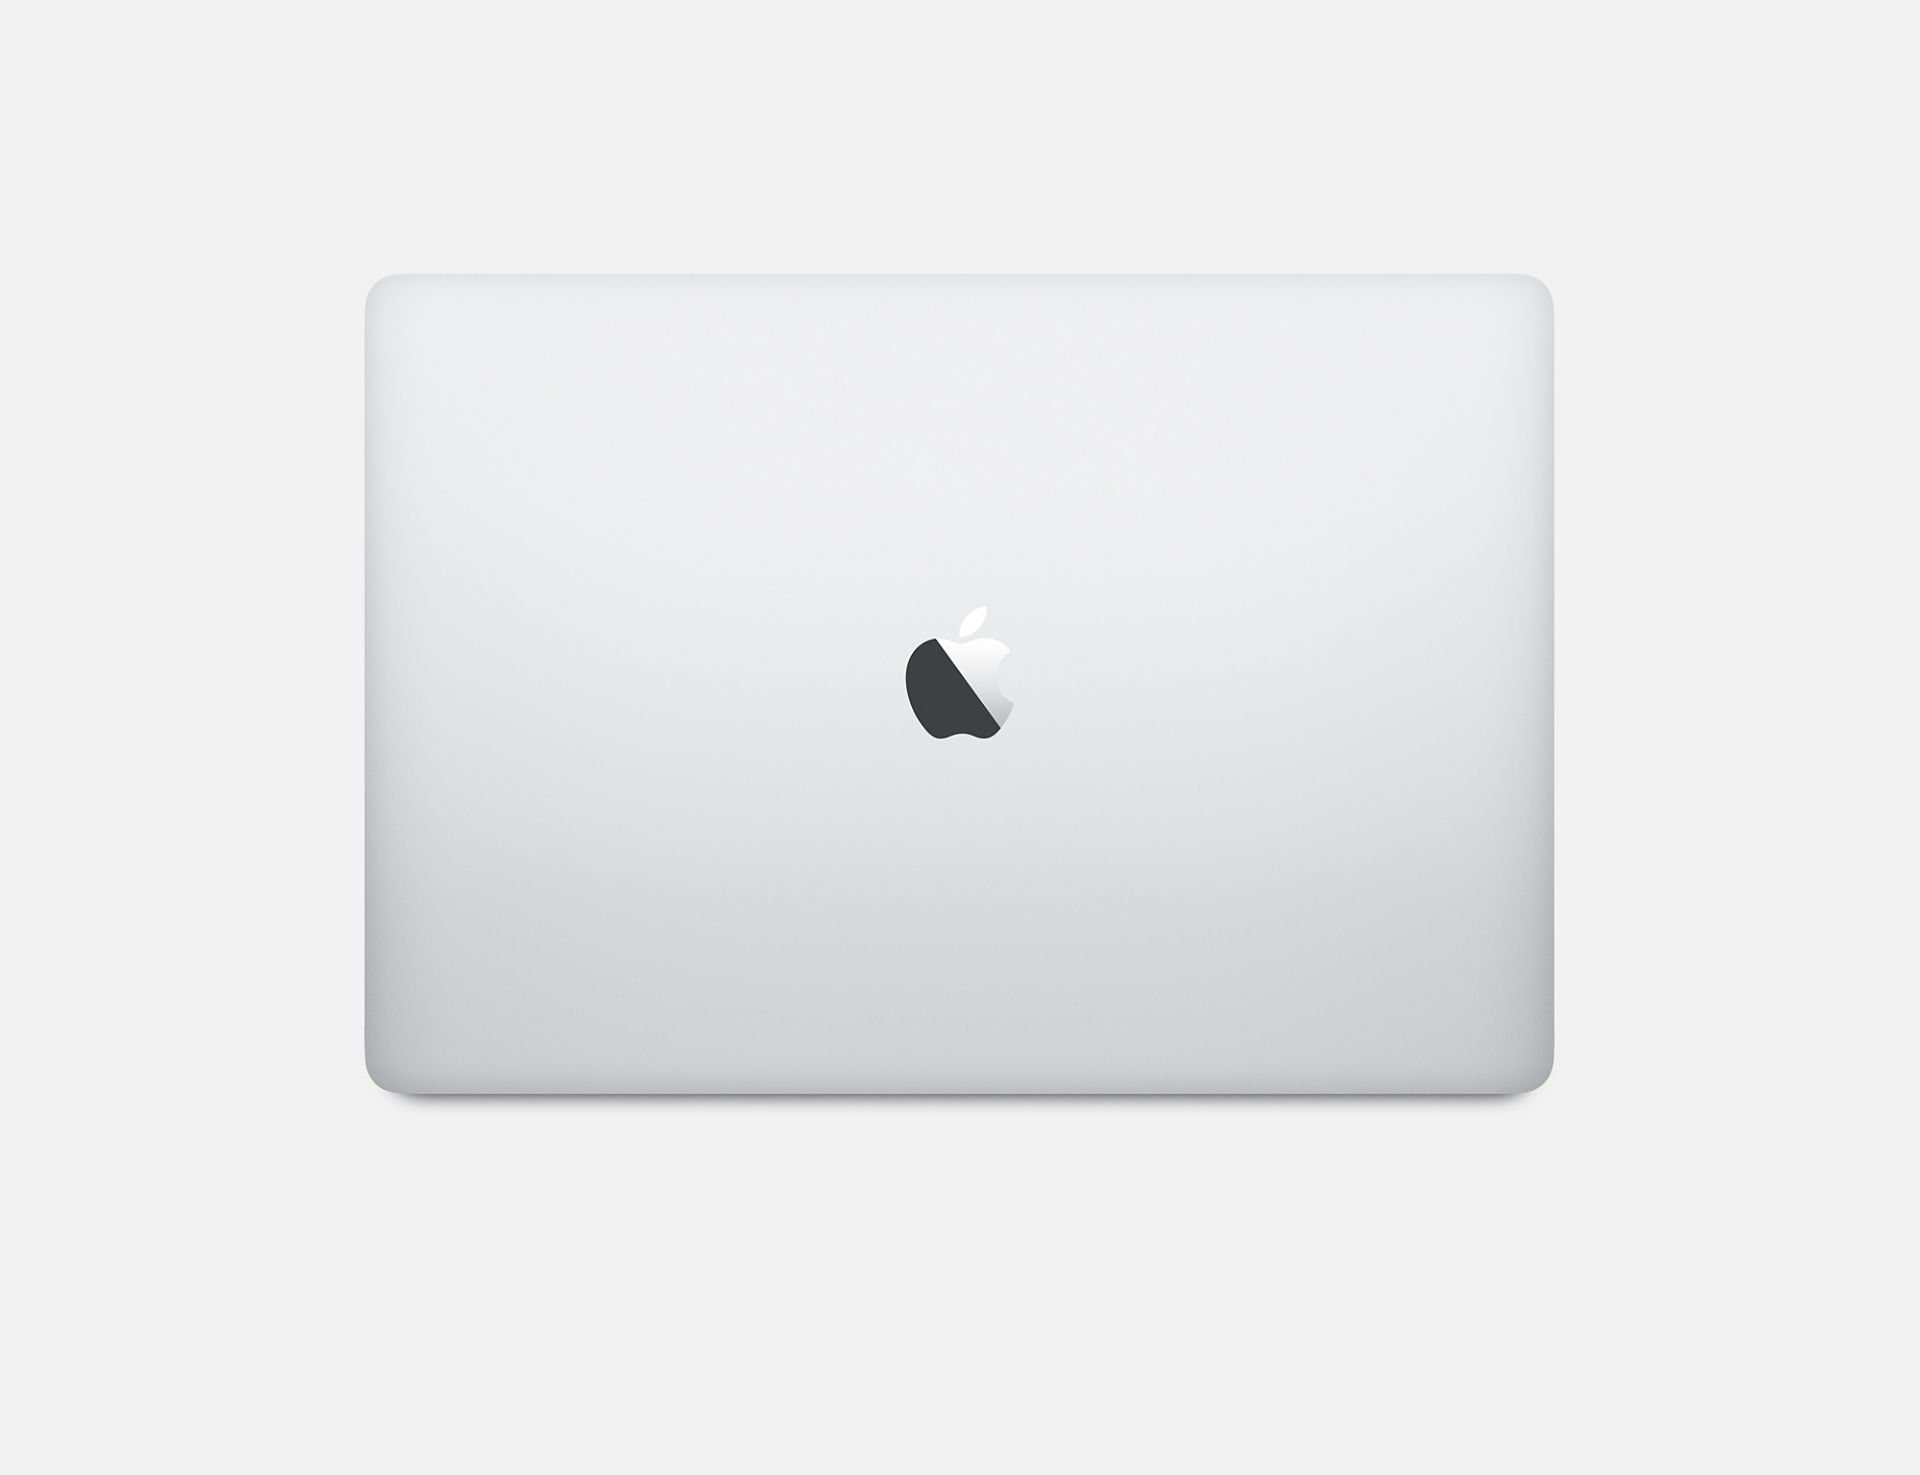 V Grade A Apple MacBook Pro 15-Inch-2.6GHz QuadCore Intel Core I7 with 6MB L3 Cache-16GB of - Image 2 of 2